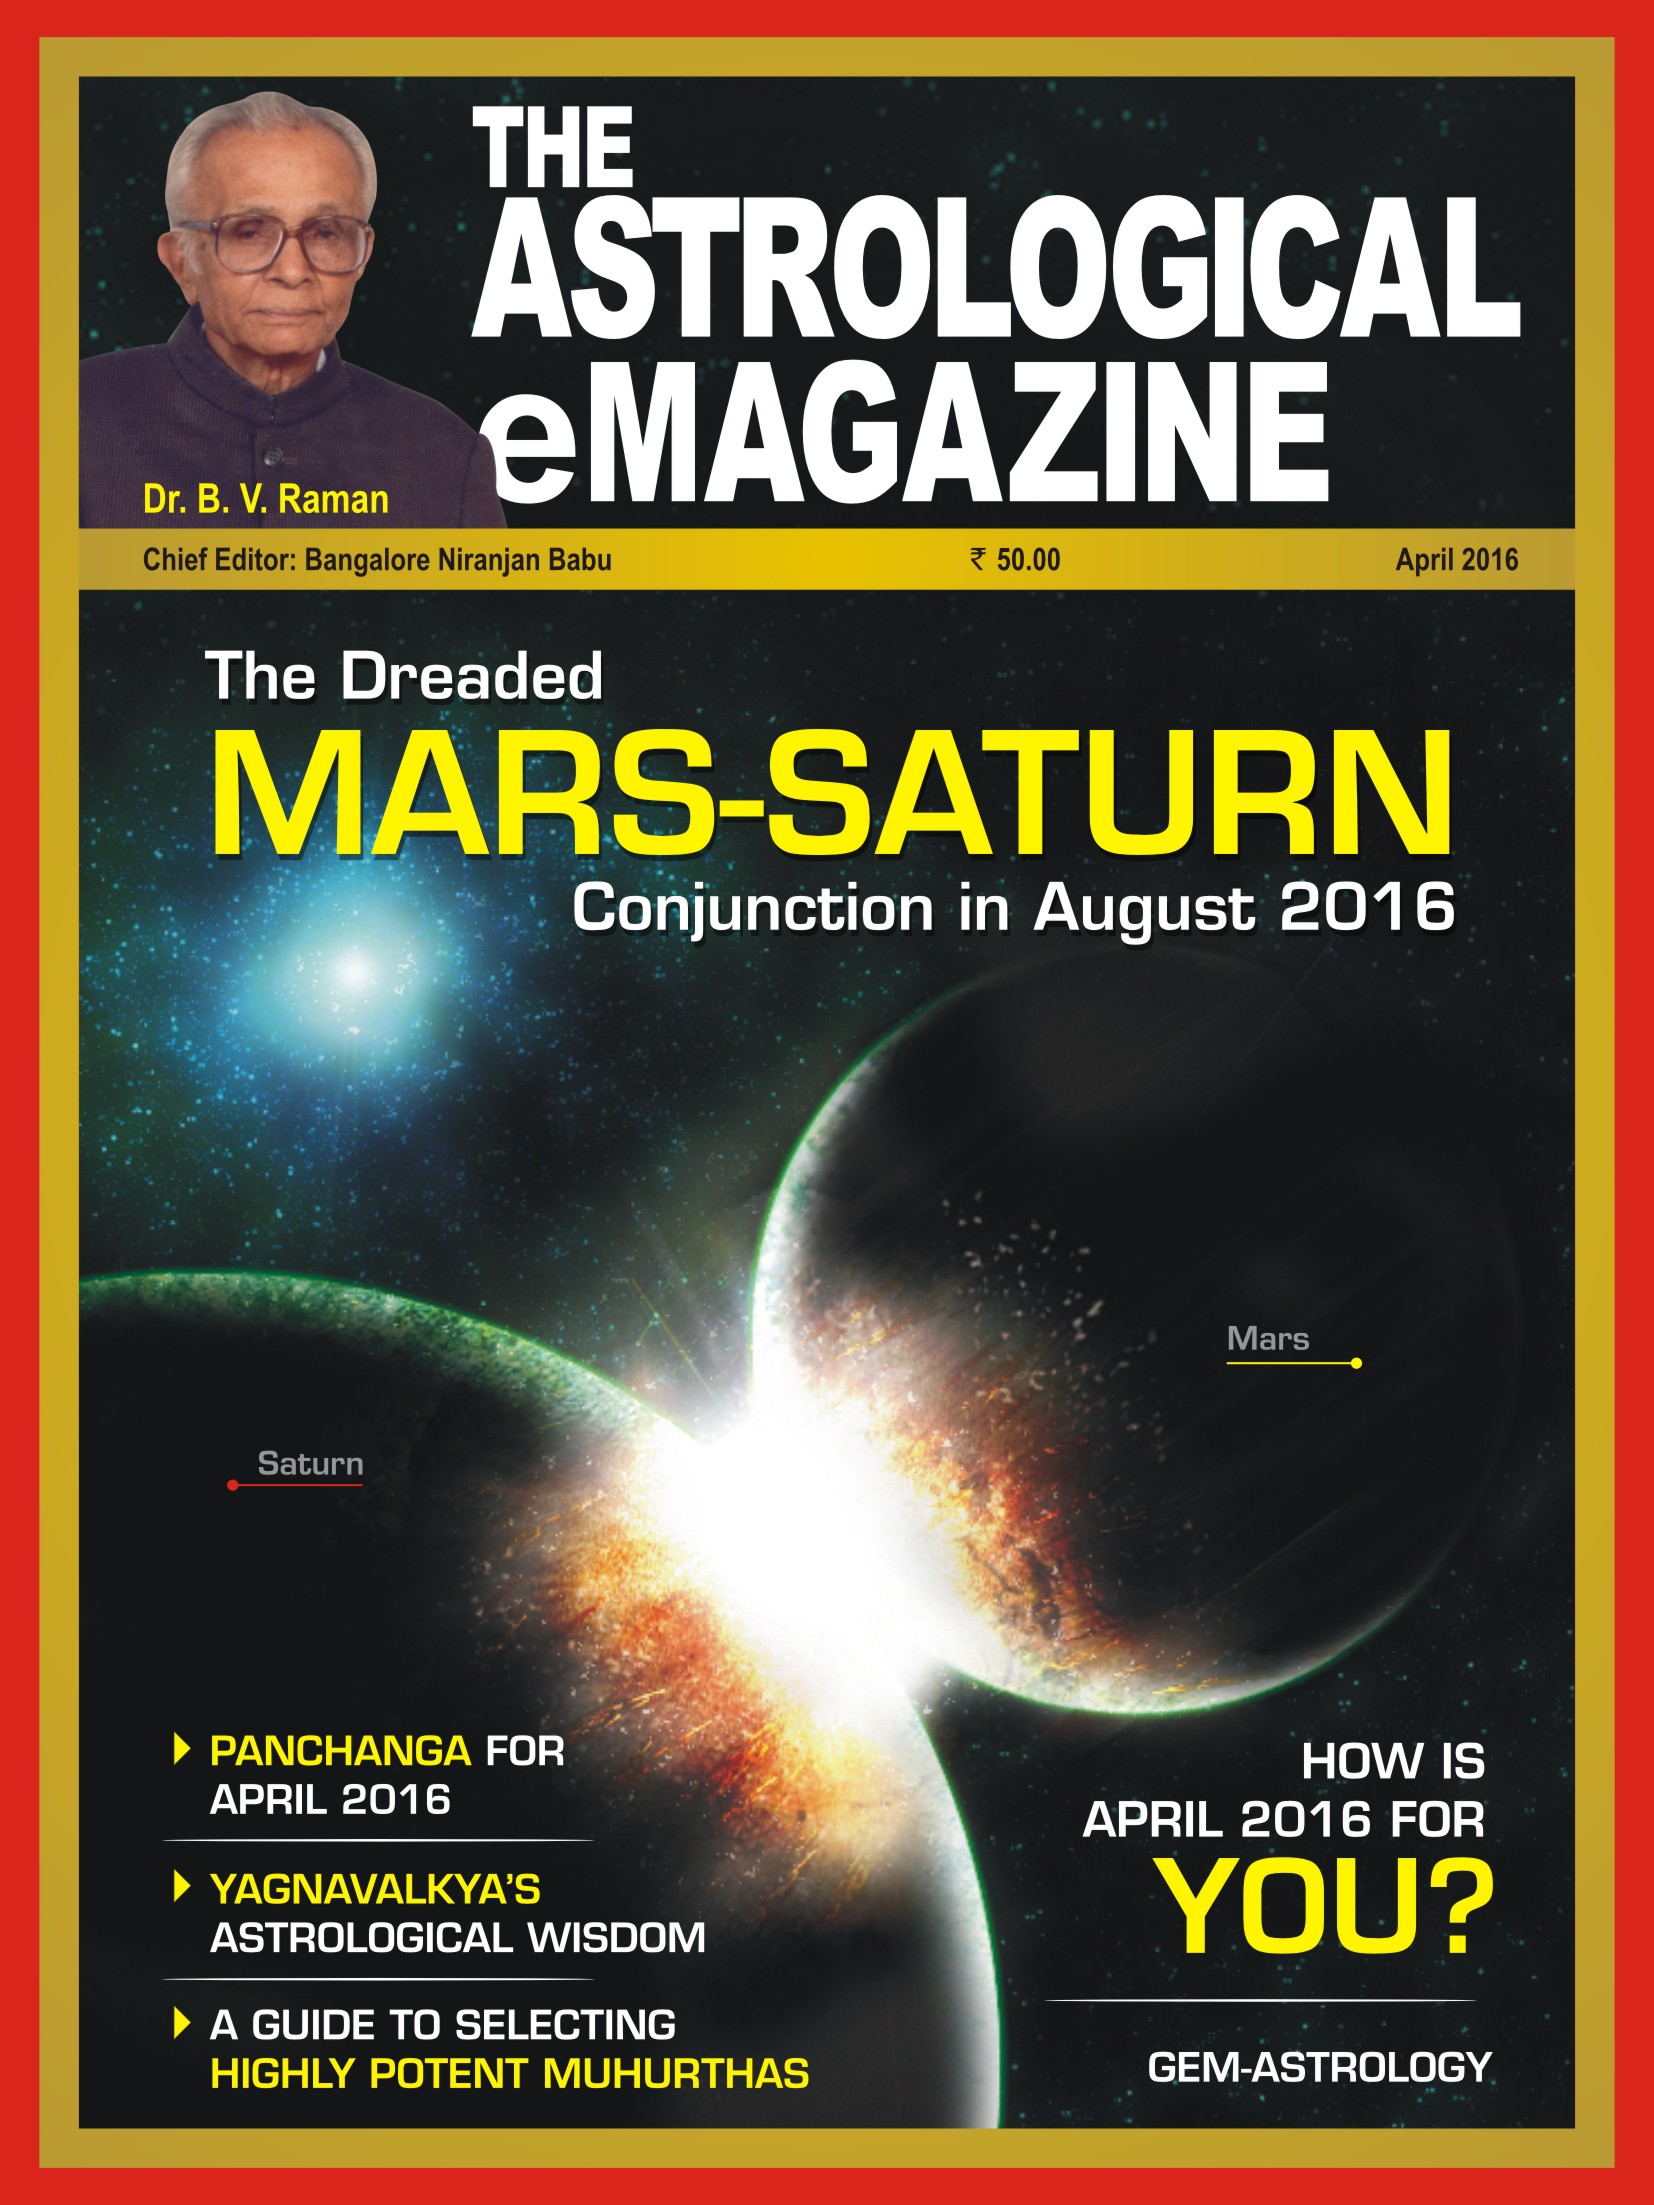 The Astrological eMagazine April 2016